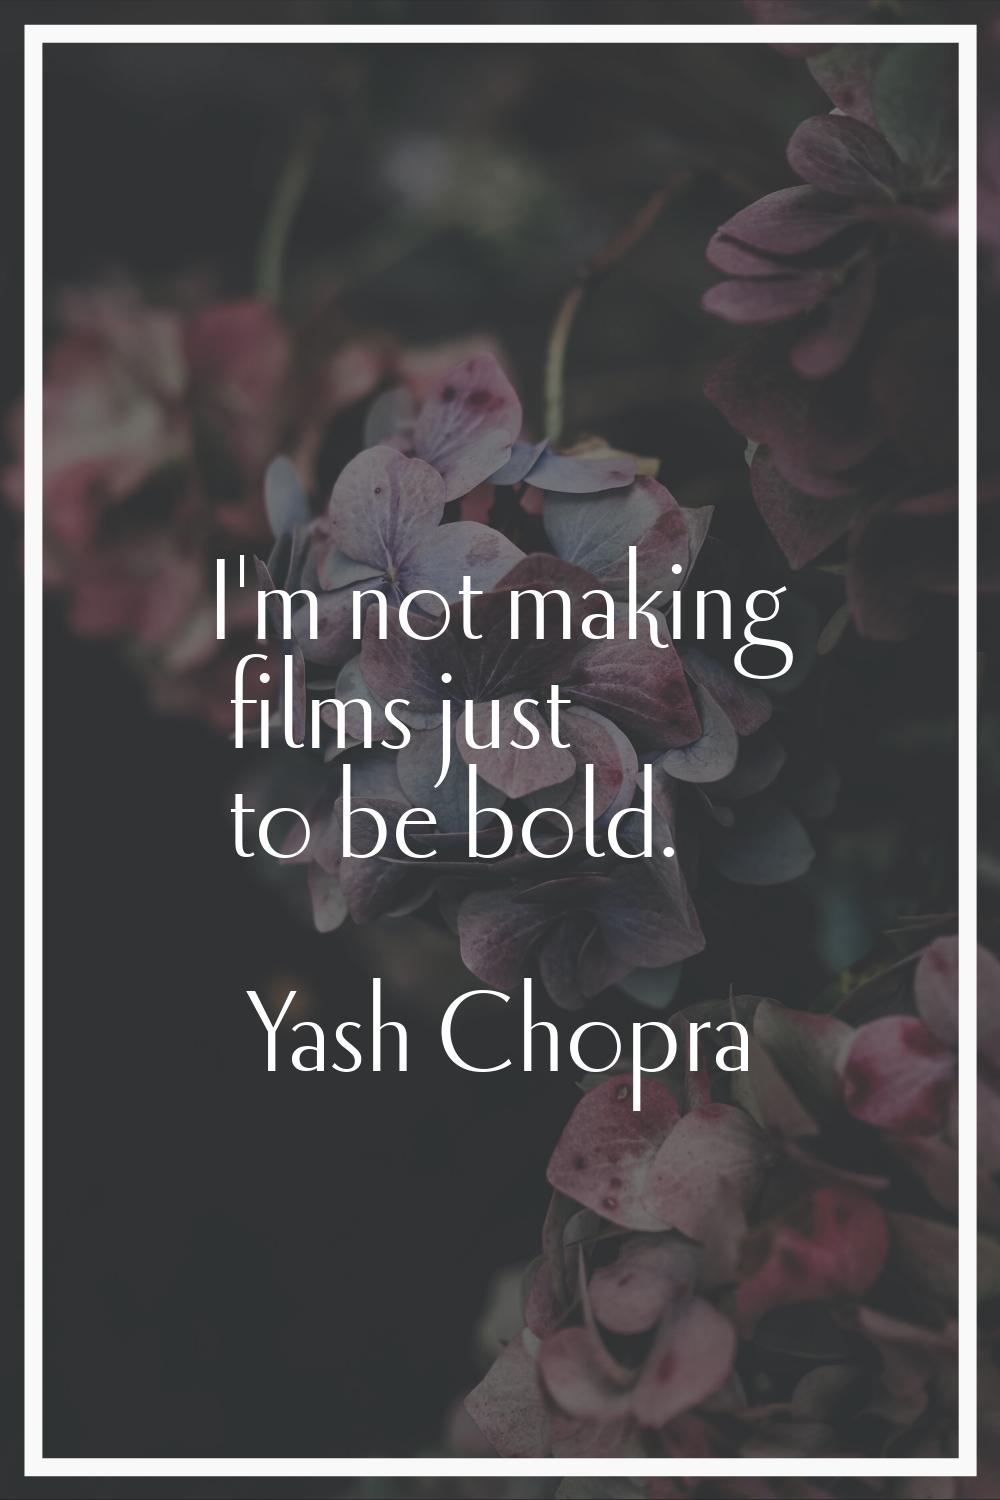 I'm not making films just to be bold.